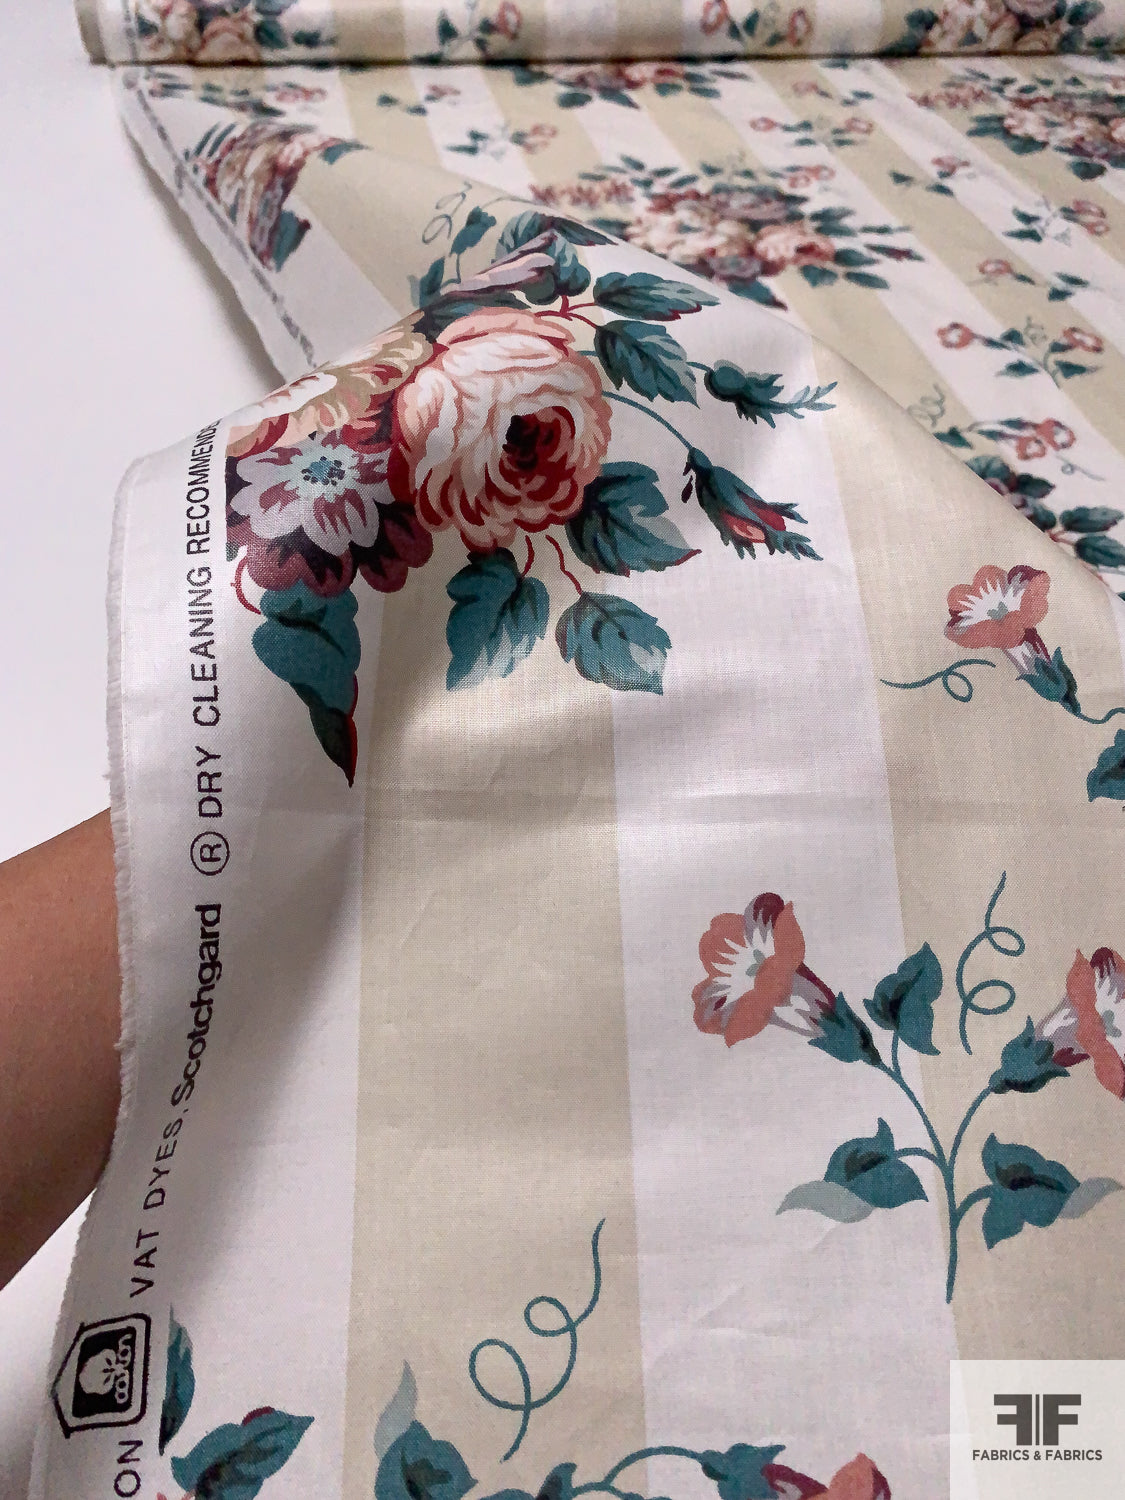 Floral Bouquets and Striped Printed Cotton Chintz - Dusty Teal / Dusty Rose / Beige / Off-White